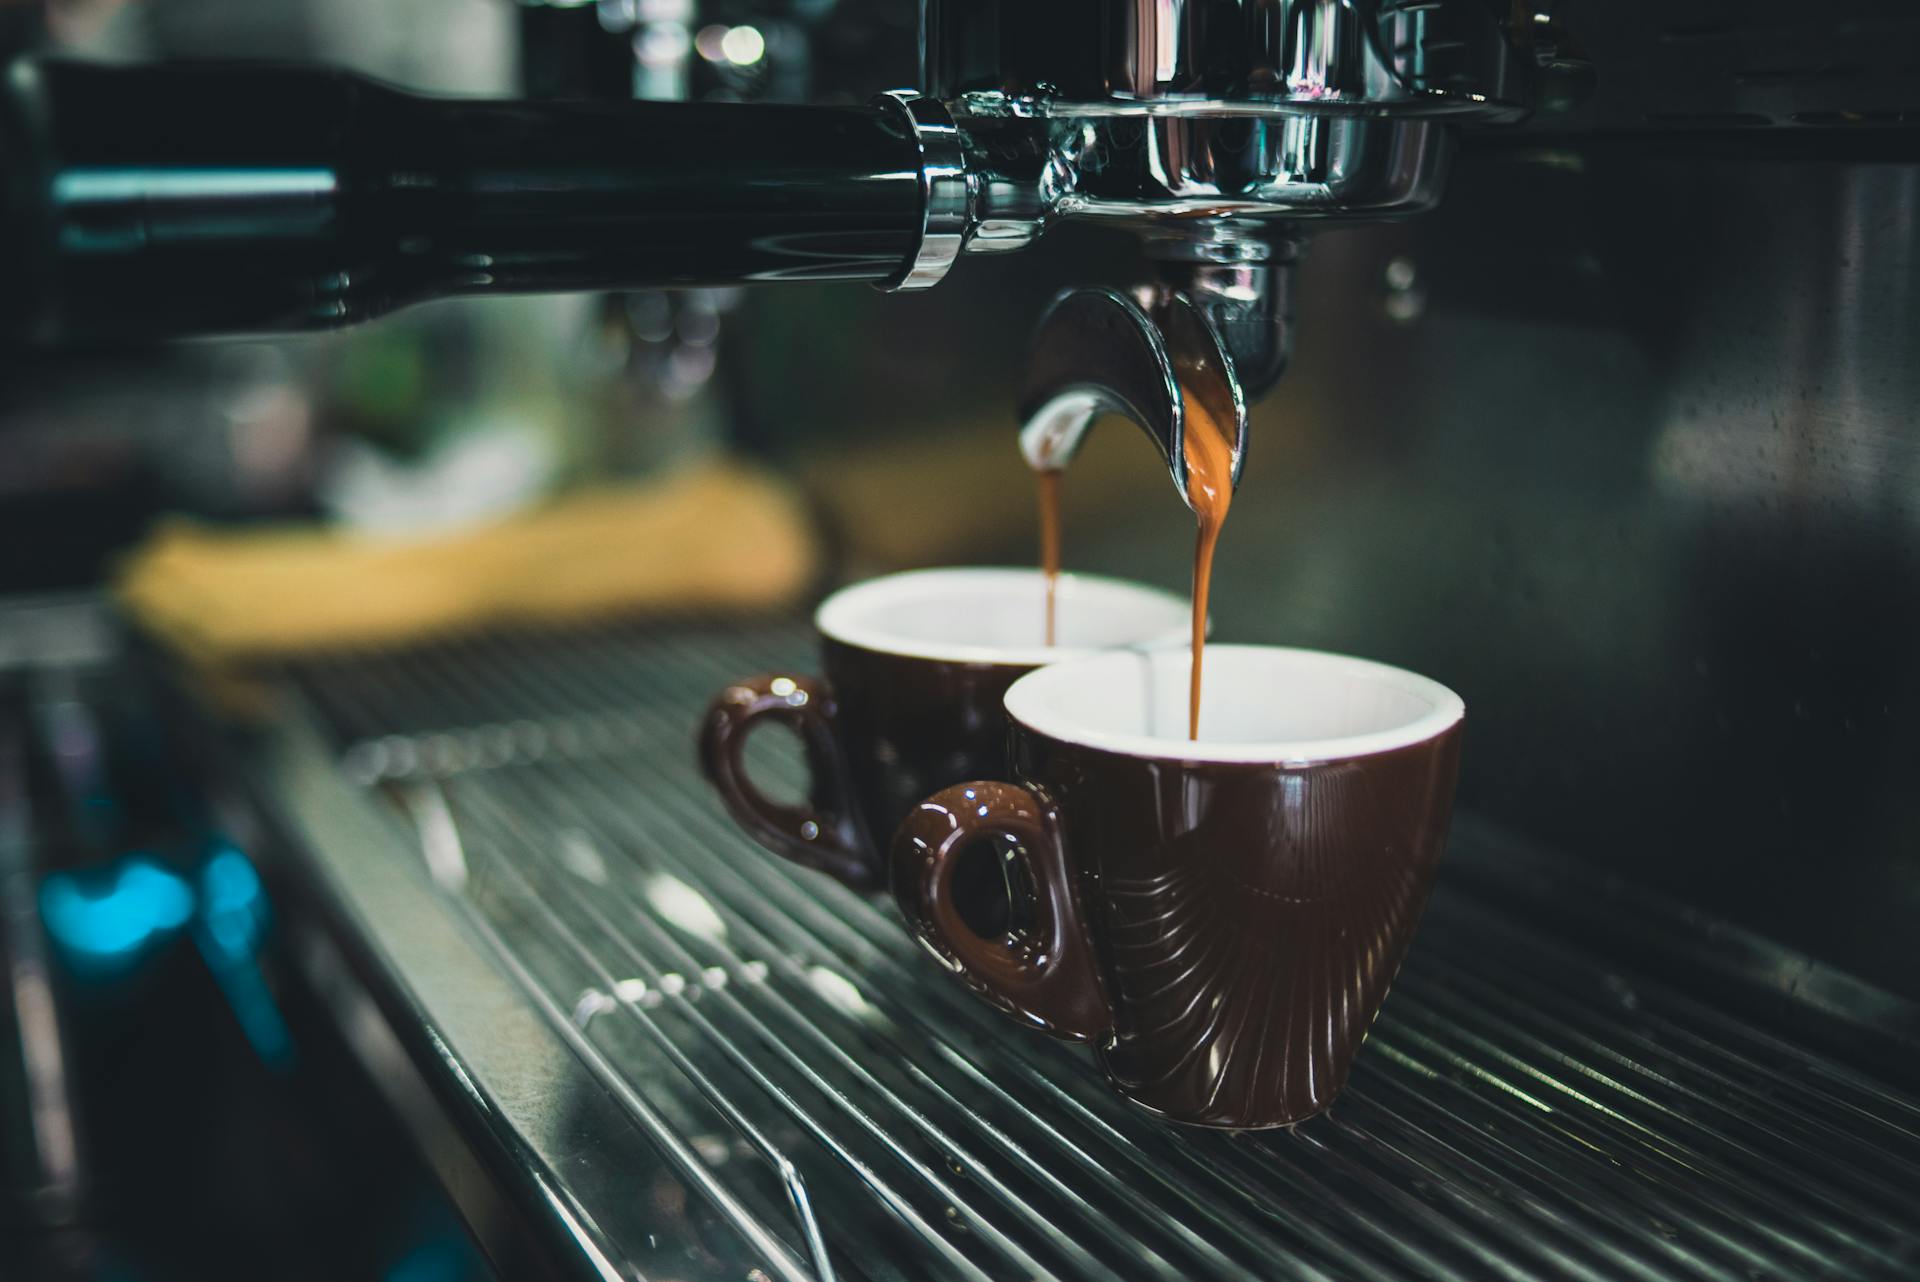 A coffee machine pouring coffee | Source: Pexels